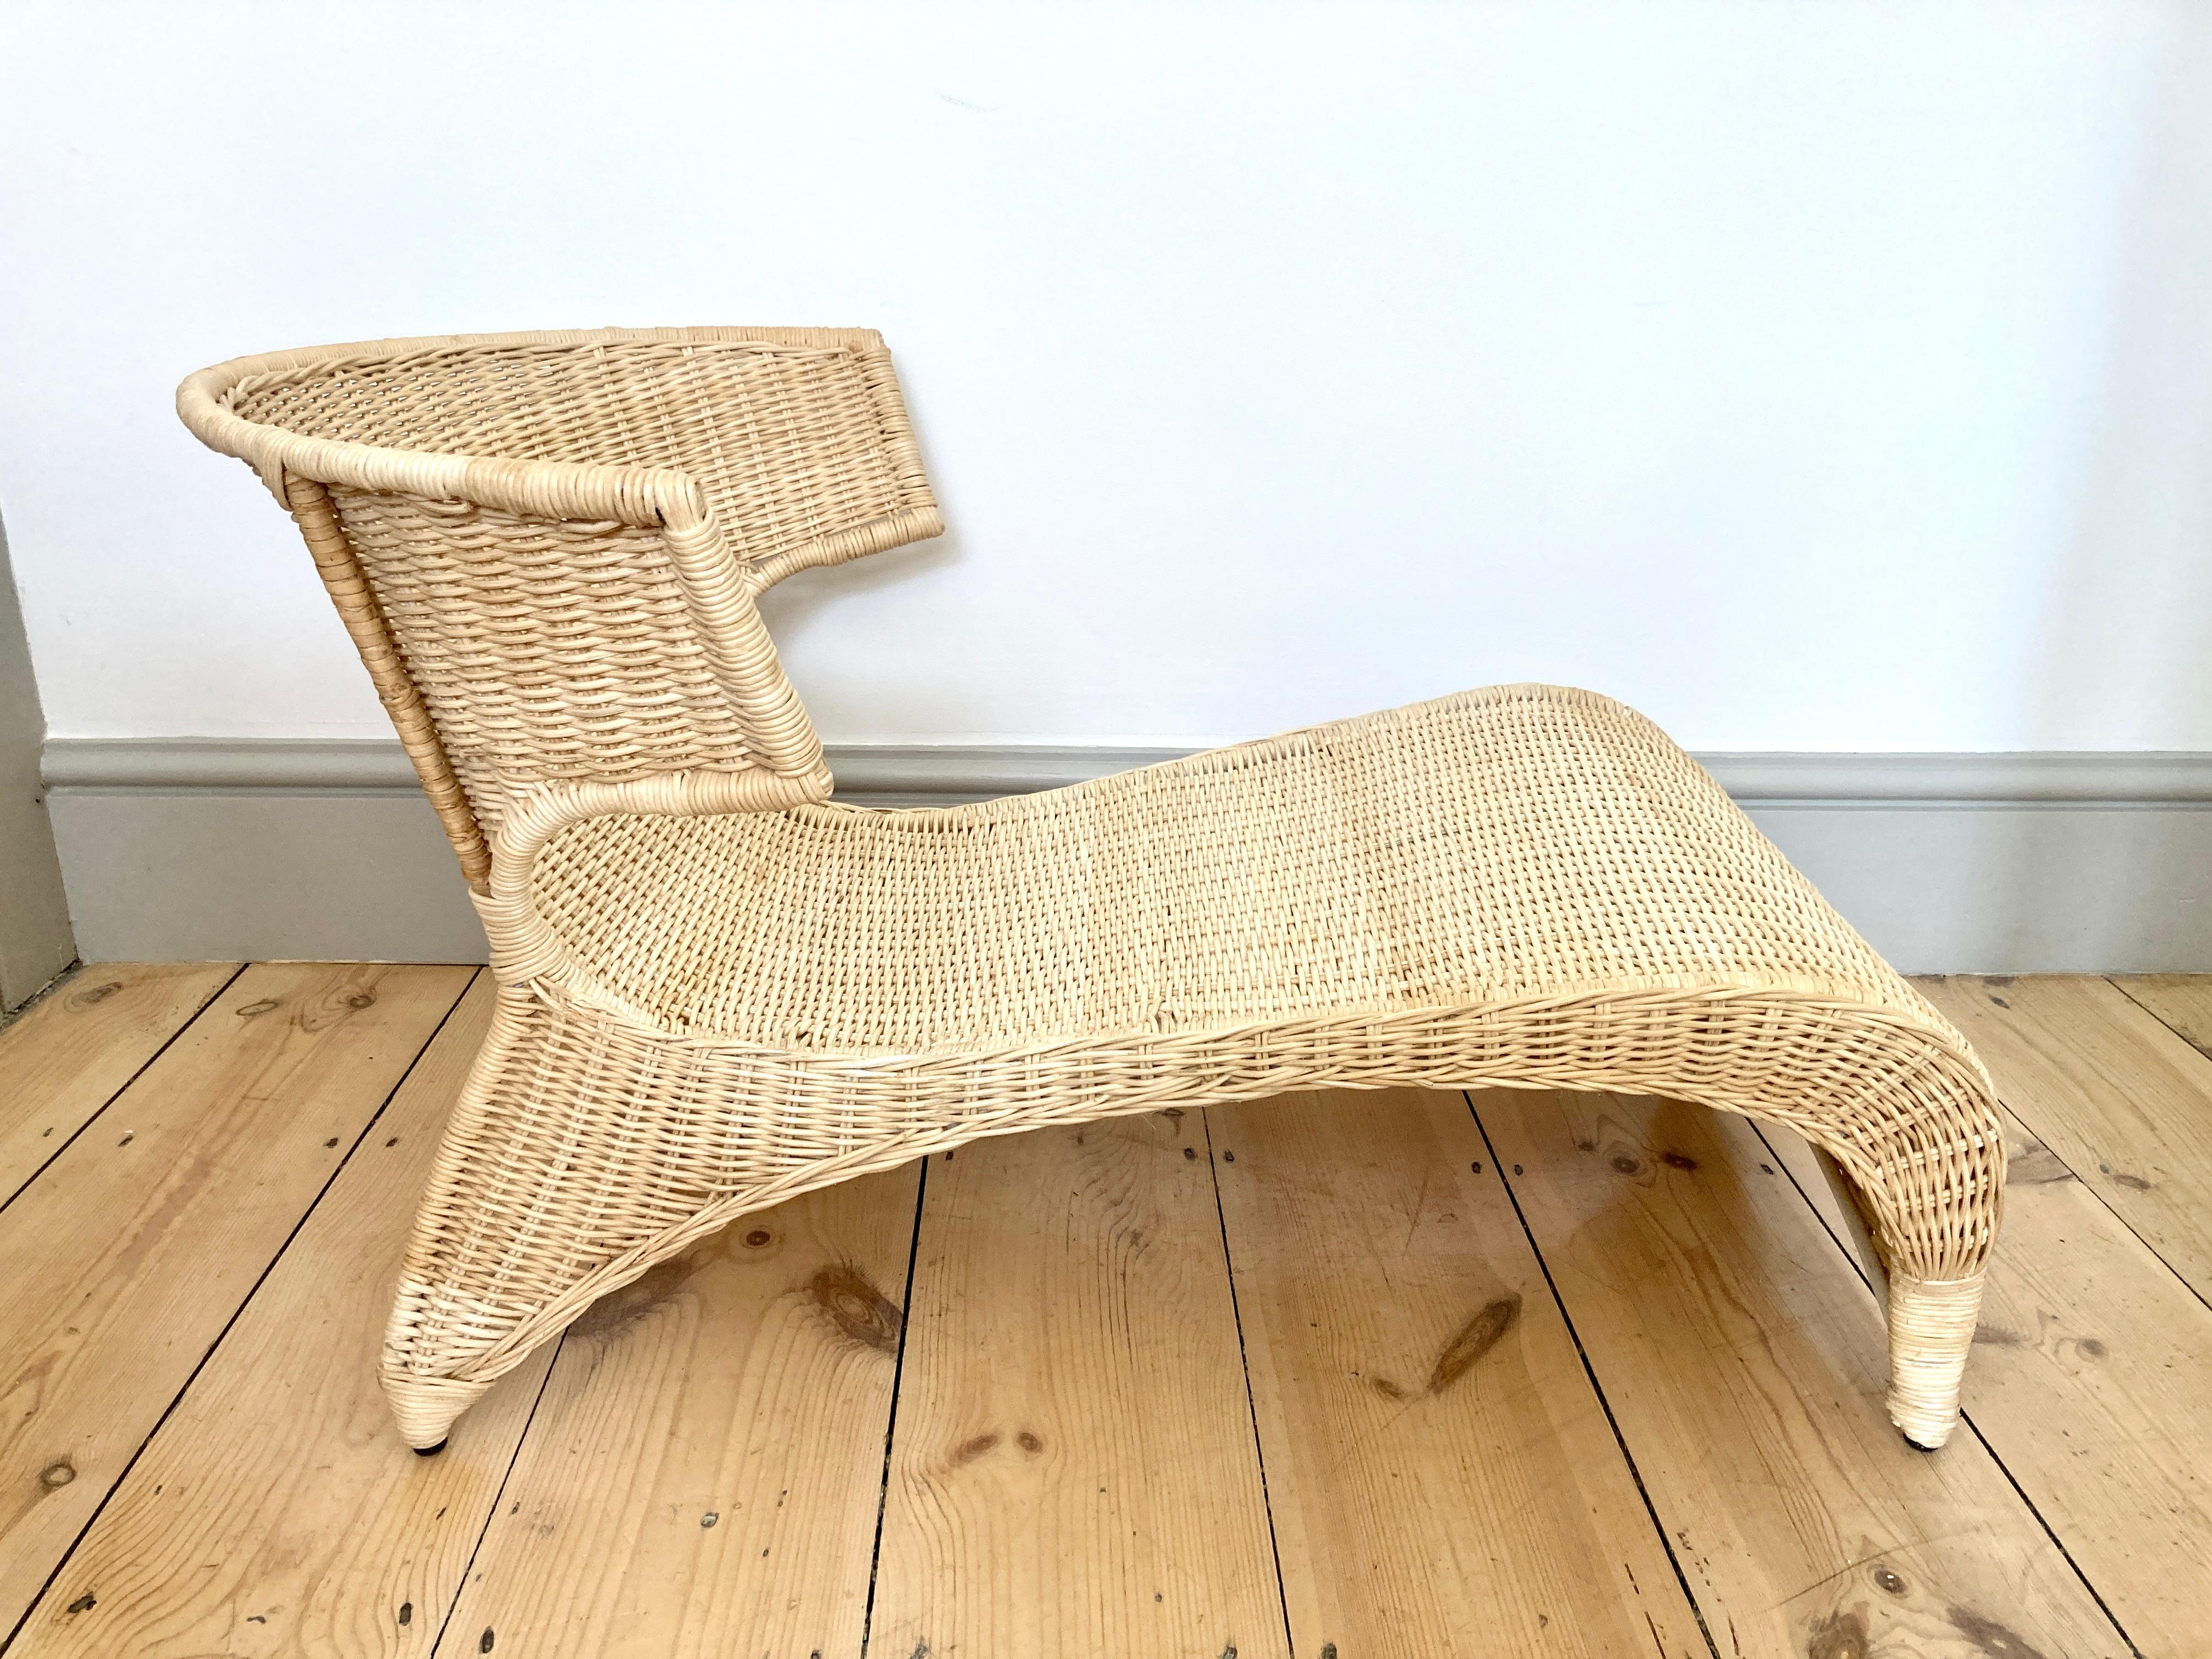 Low Lounge Chair / Chaise Longue by Monika Mulder for Ikea Savo Natural Rattan 5